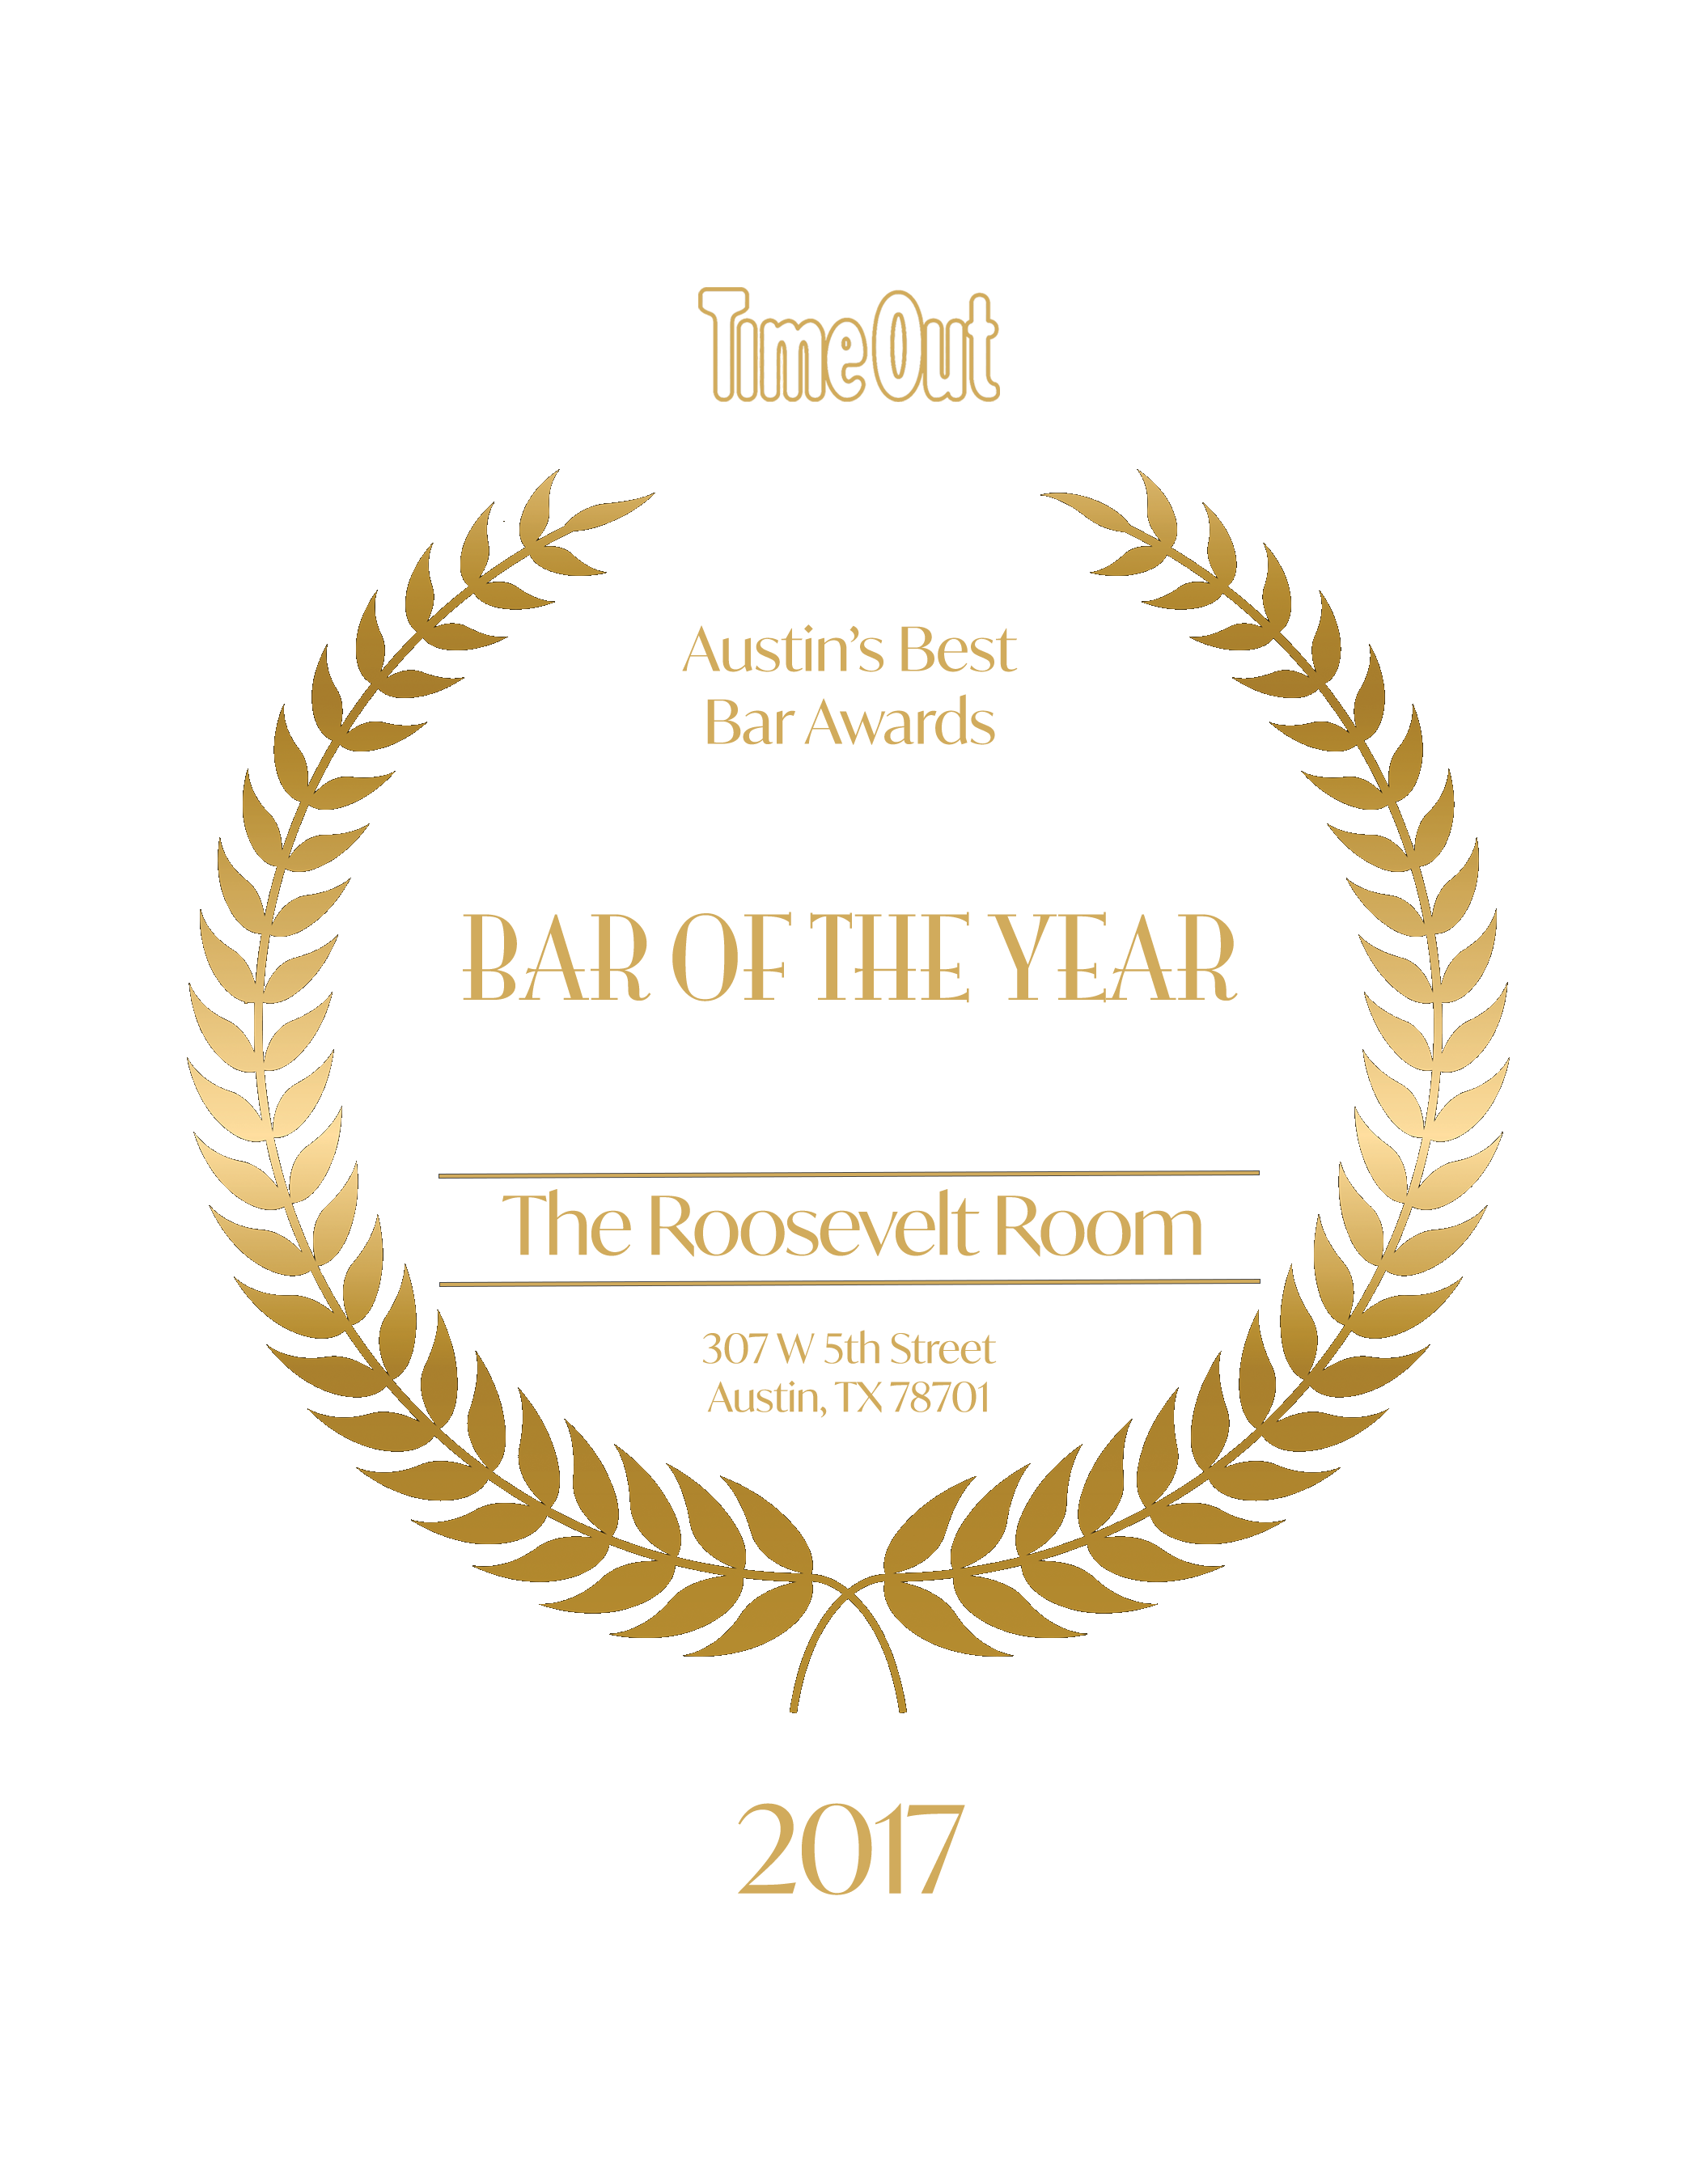 TimeOut Bar of the Year Plaque 7x9 (No Background).png